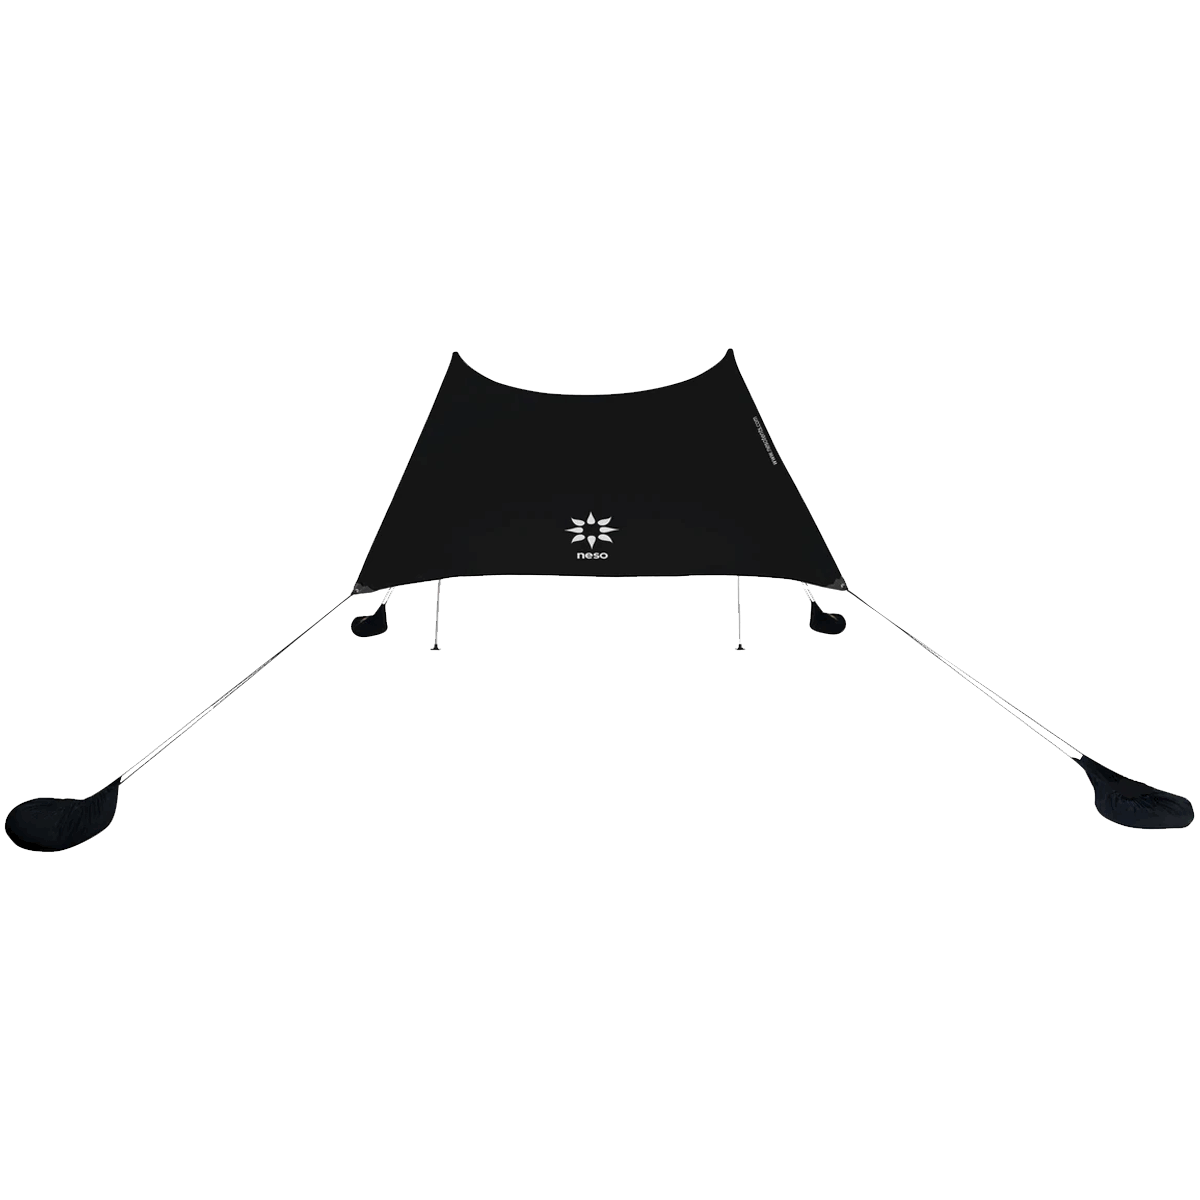 Neso Tent: Portable Beach Canopy Sunshade with Sand Anchors (Black) | Image